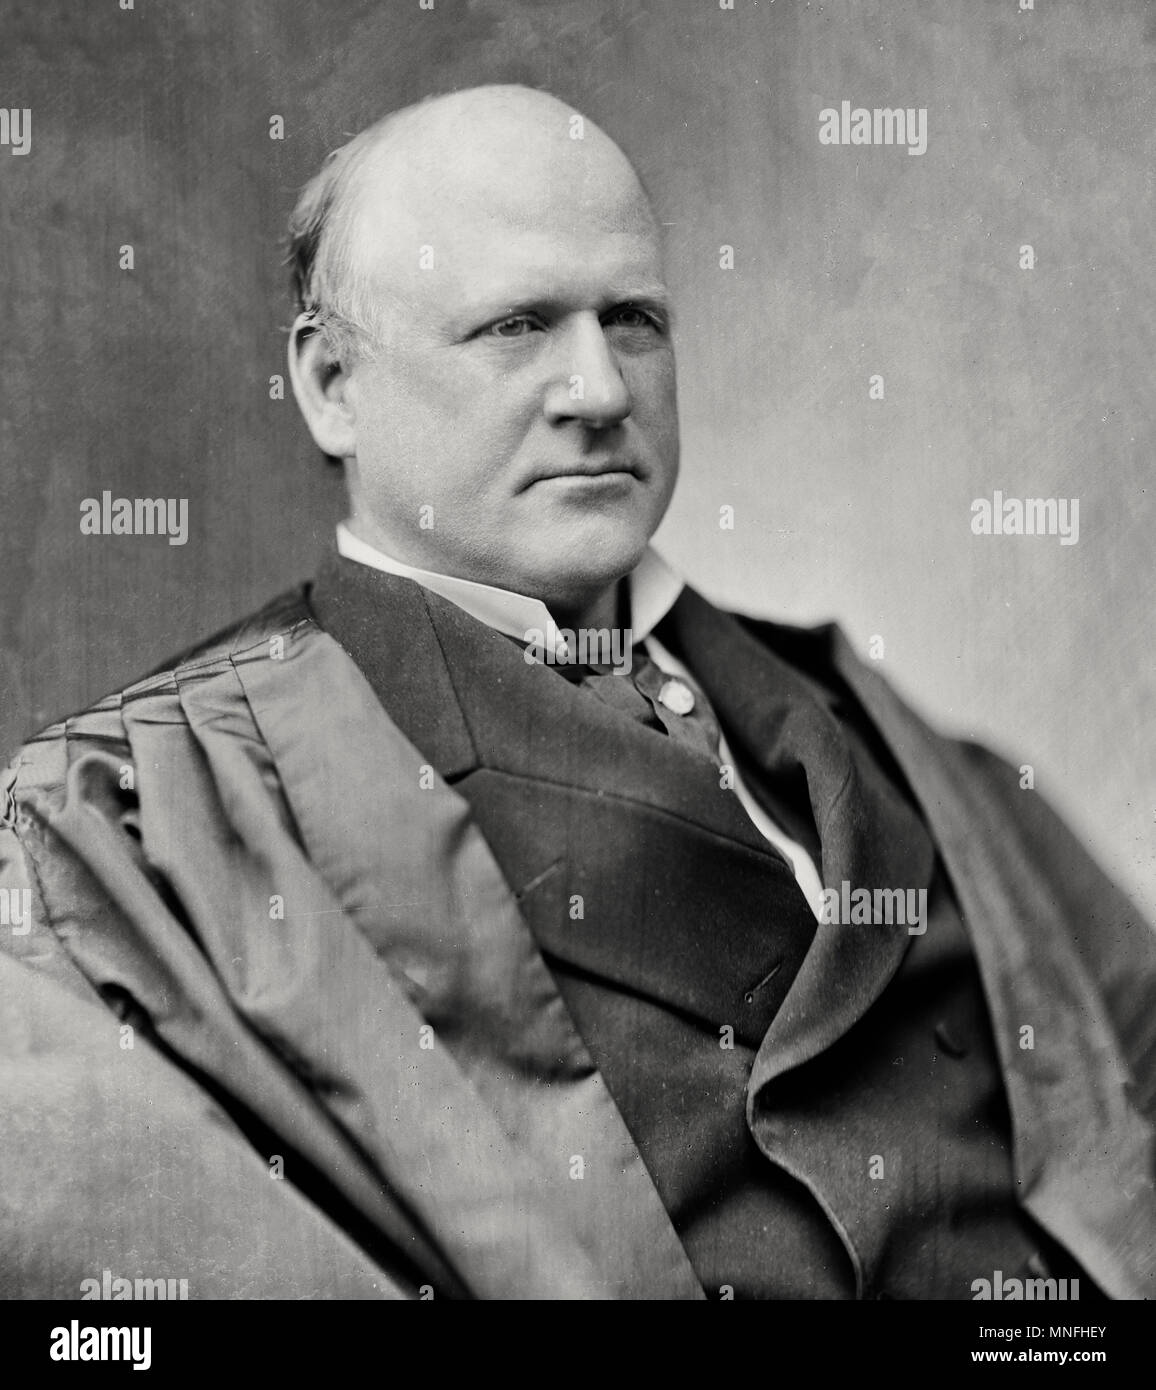 Judge John Marshall Harlan, Supreme Court - became known as the 'Great Dissenter' for his fiery dissent in Plessy and other early civil rights cases. Circa 1870 Stock Photo